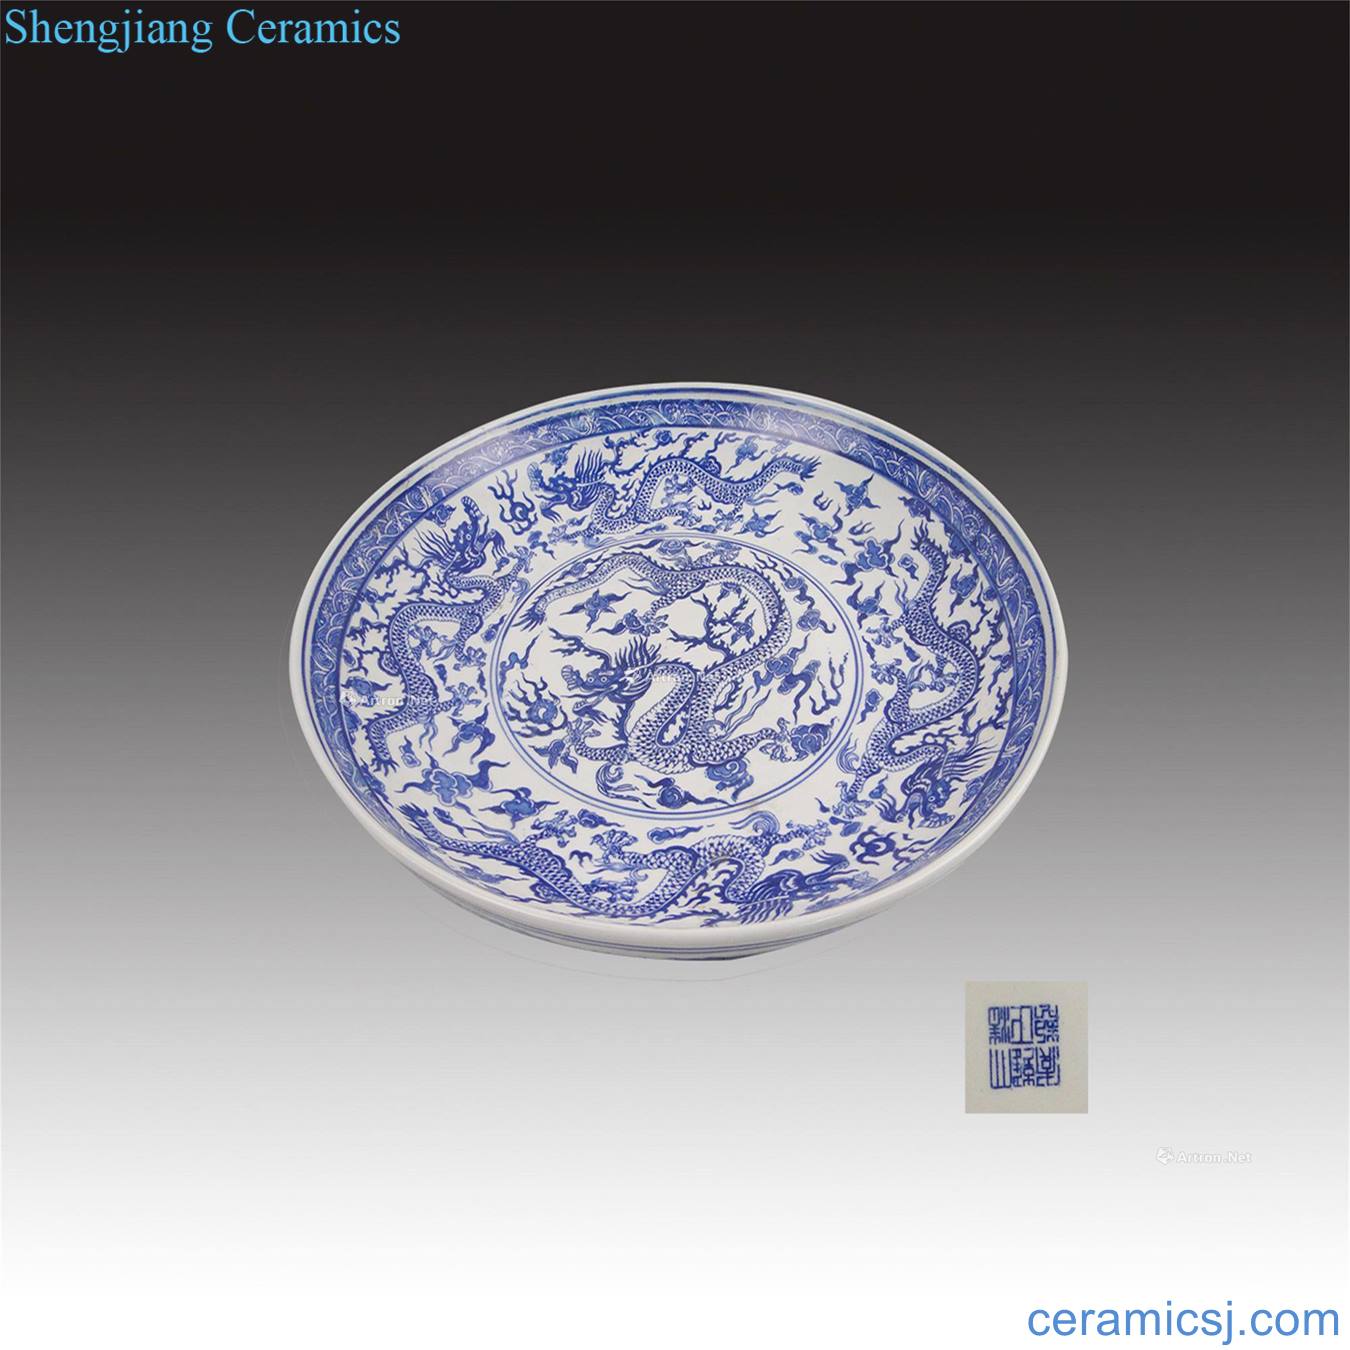 In the qing dynasty Blue and white plate, Kowloon